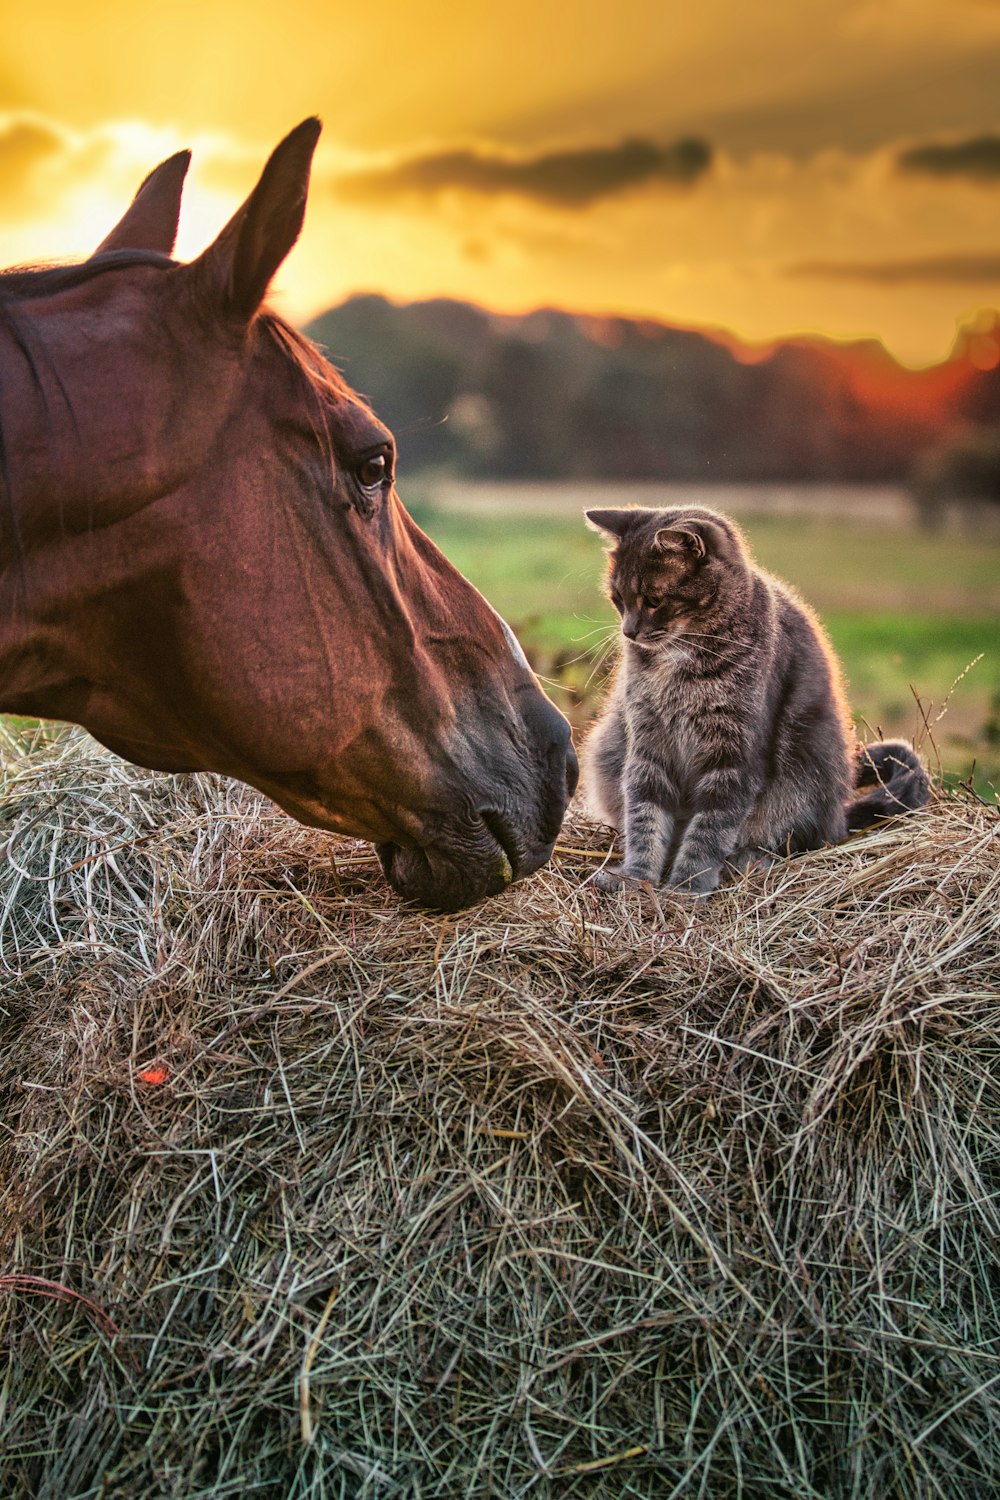 a cat sitting on top of a pile of hay next to a horse